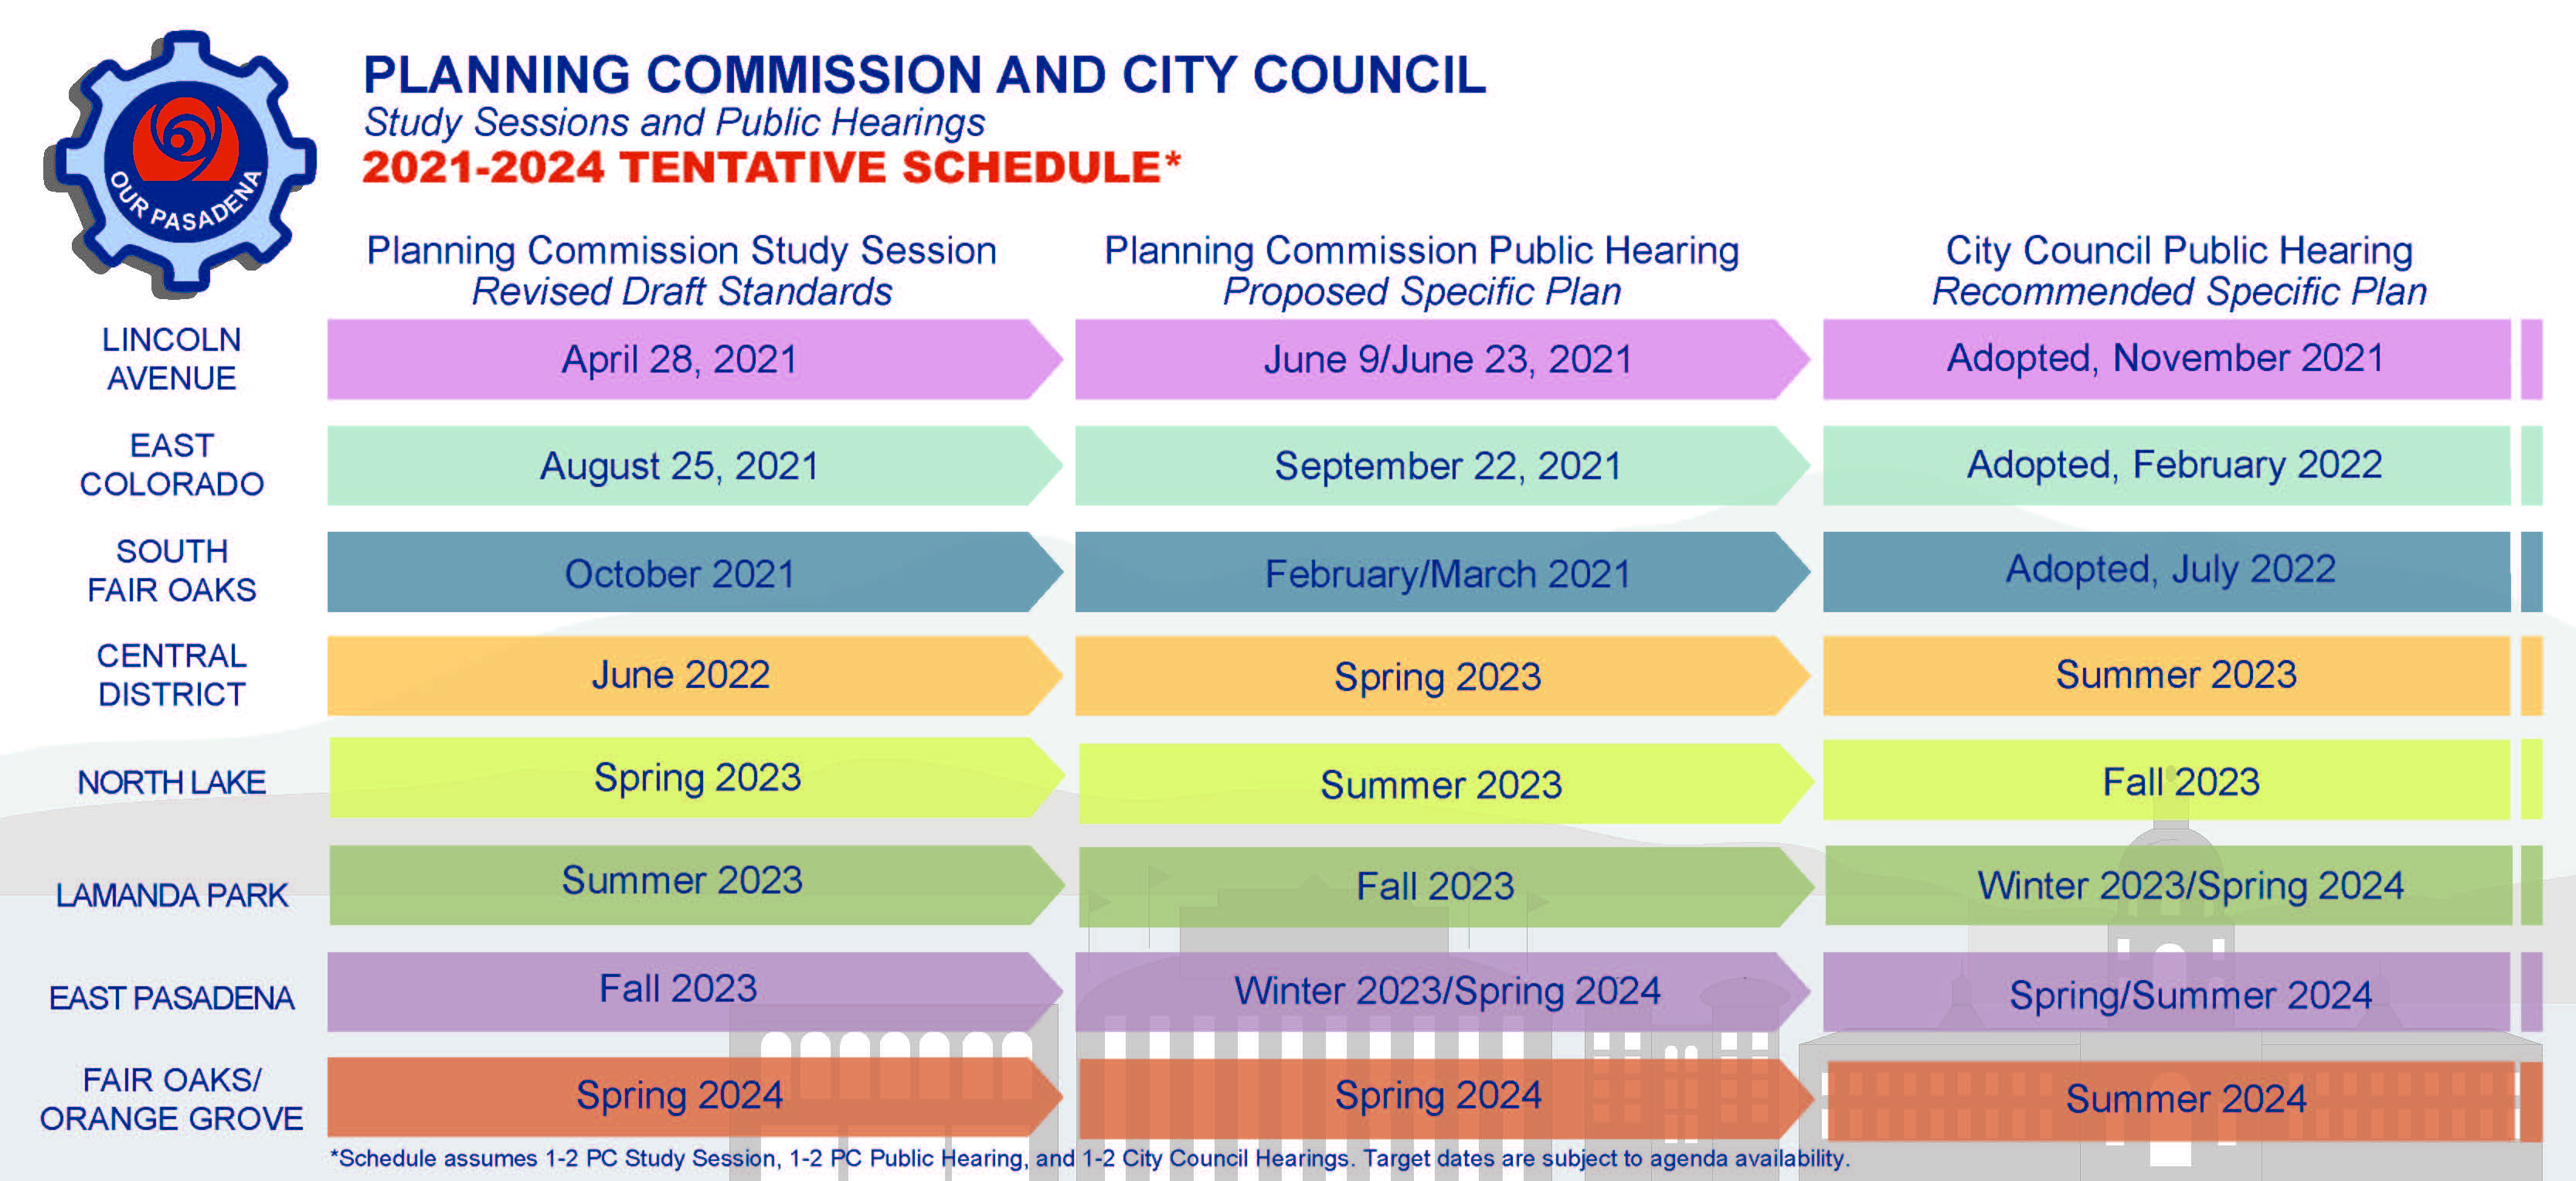 The program’s timeline for the 8 Specific Plans scheduled to present updated plans to the Planning Commission and City Council. 